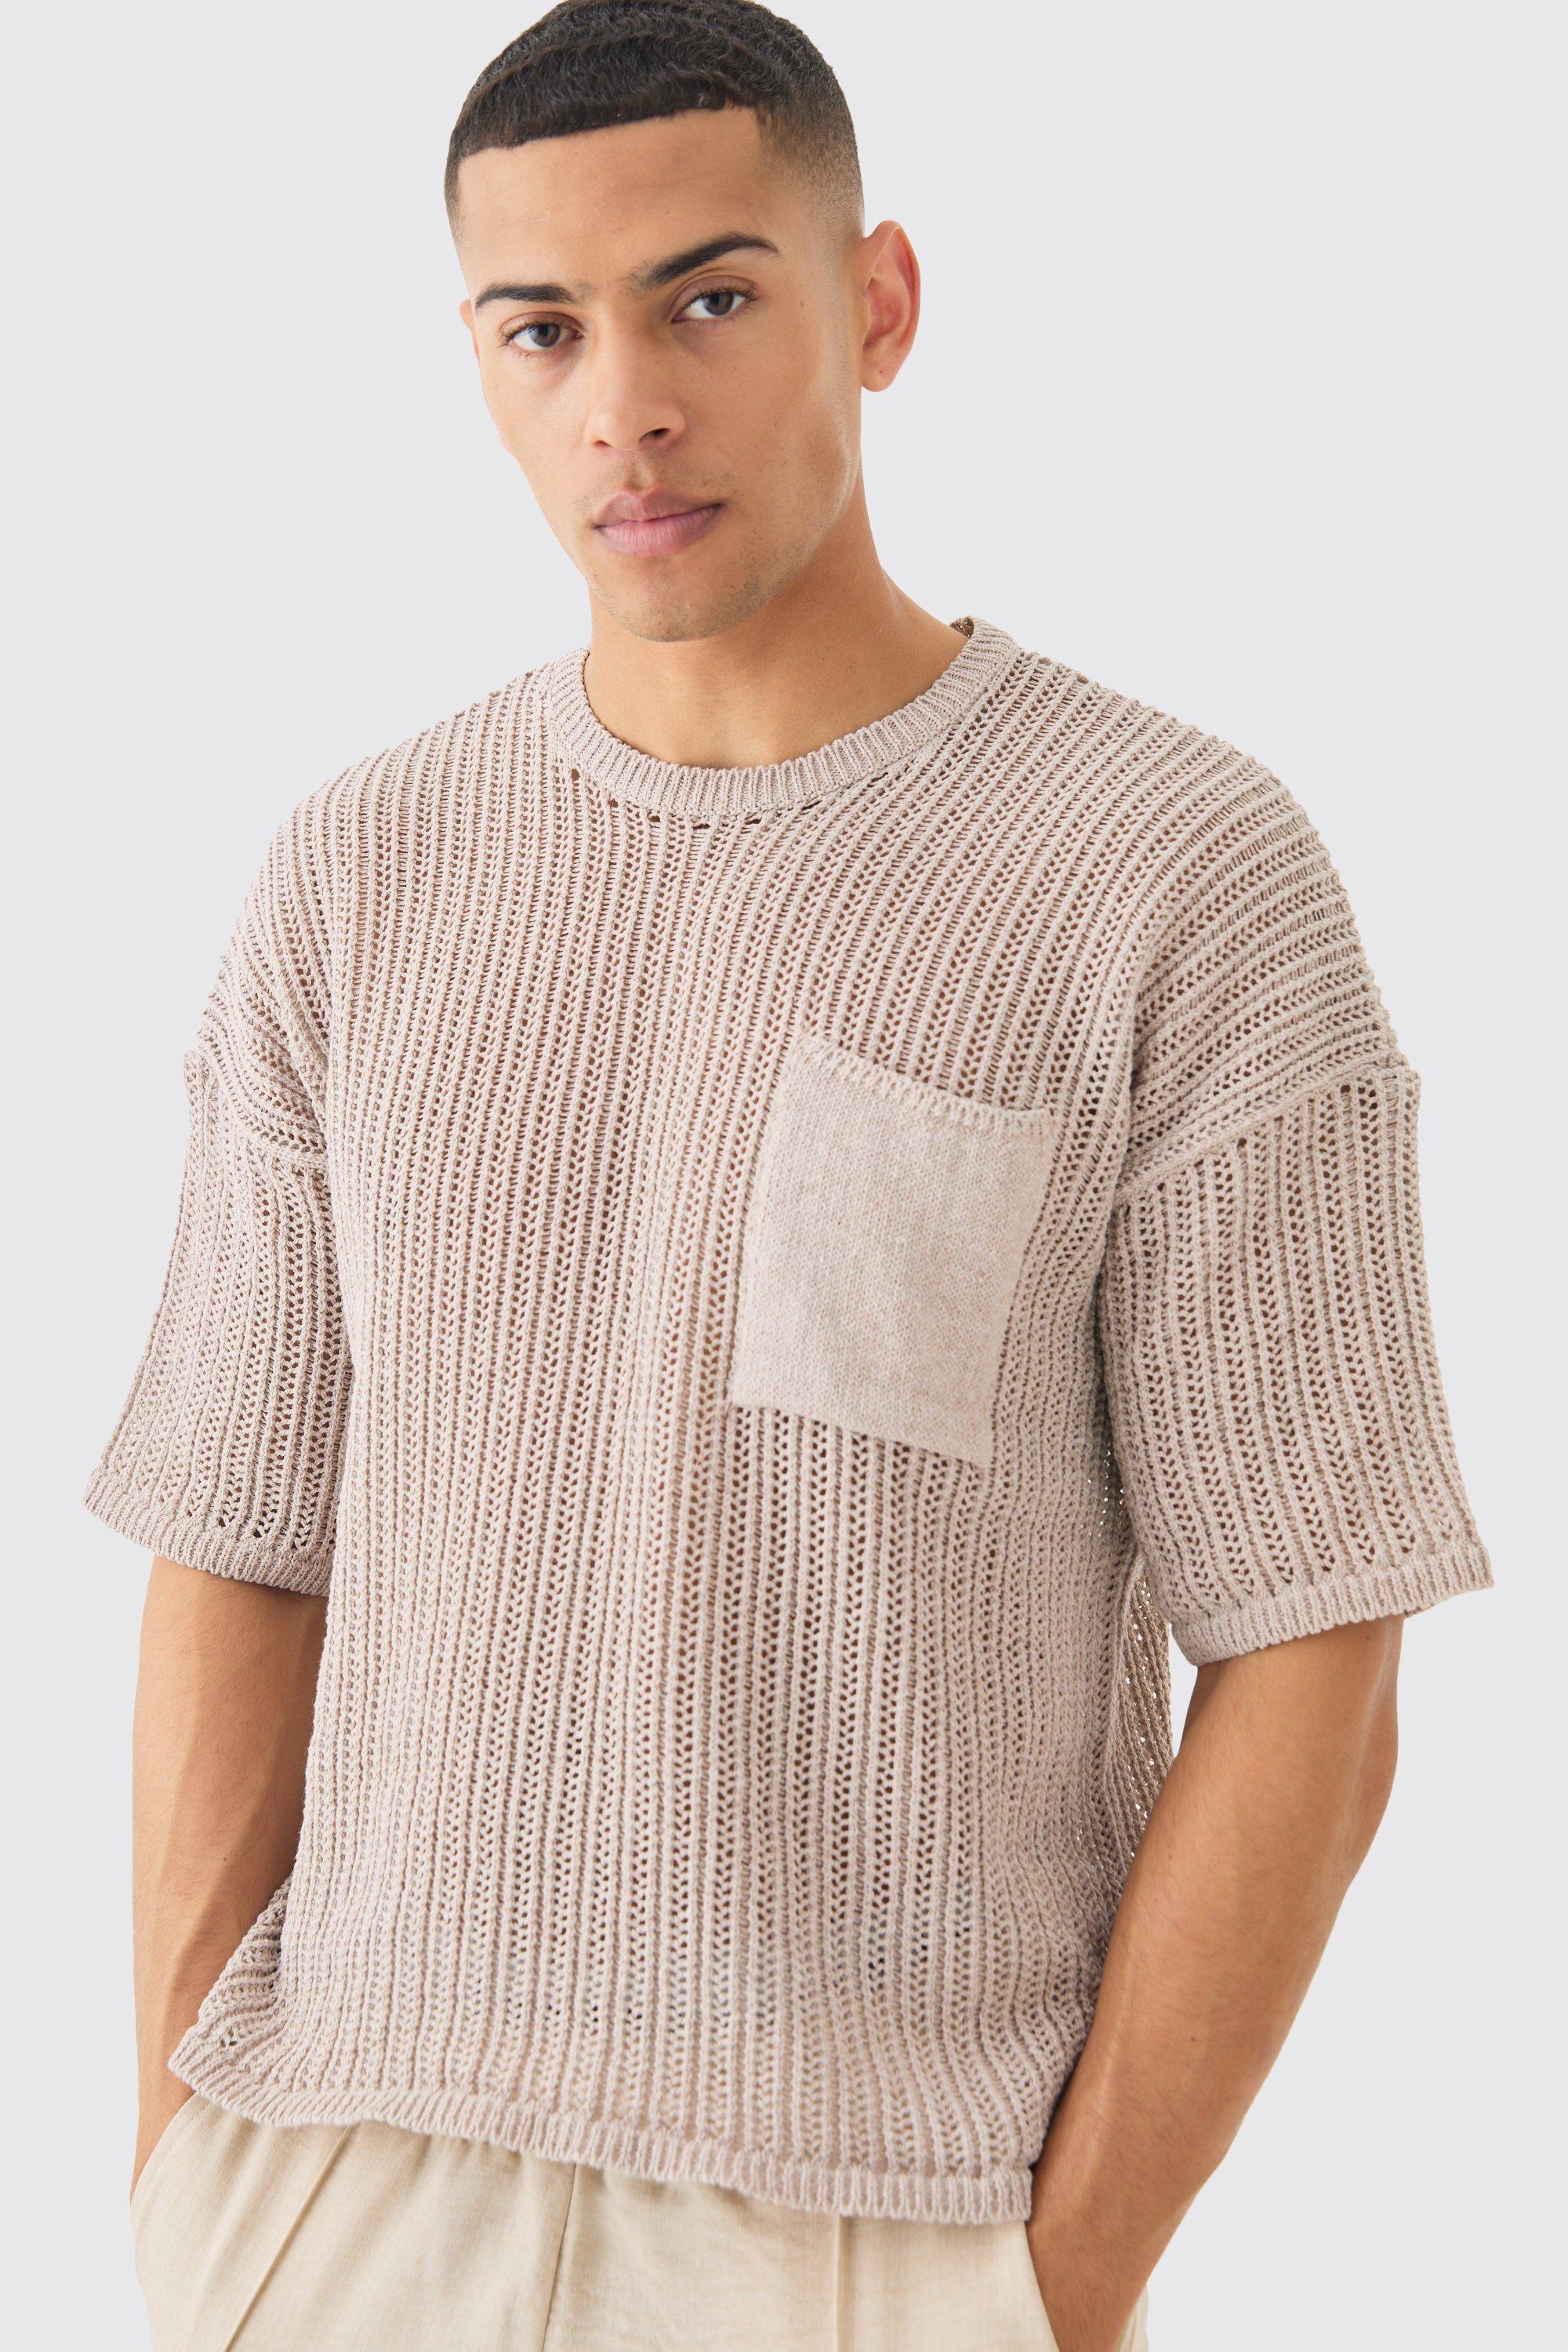 Image of Oversized Open Stitch T-shirt With Pocket In Stone, Beige